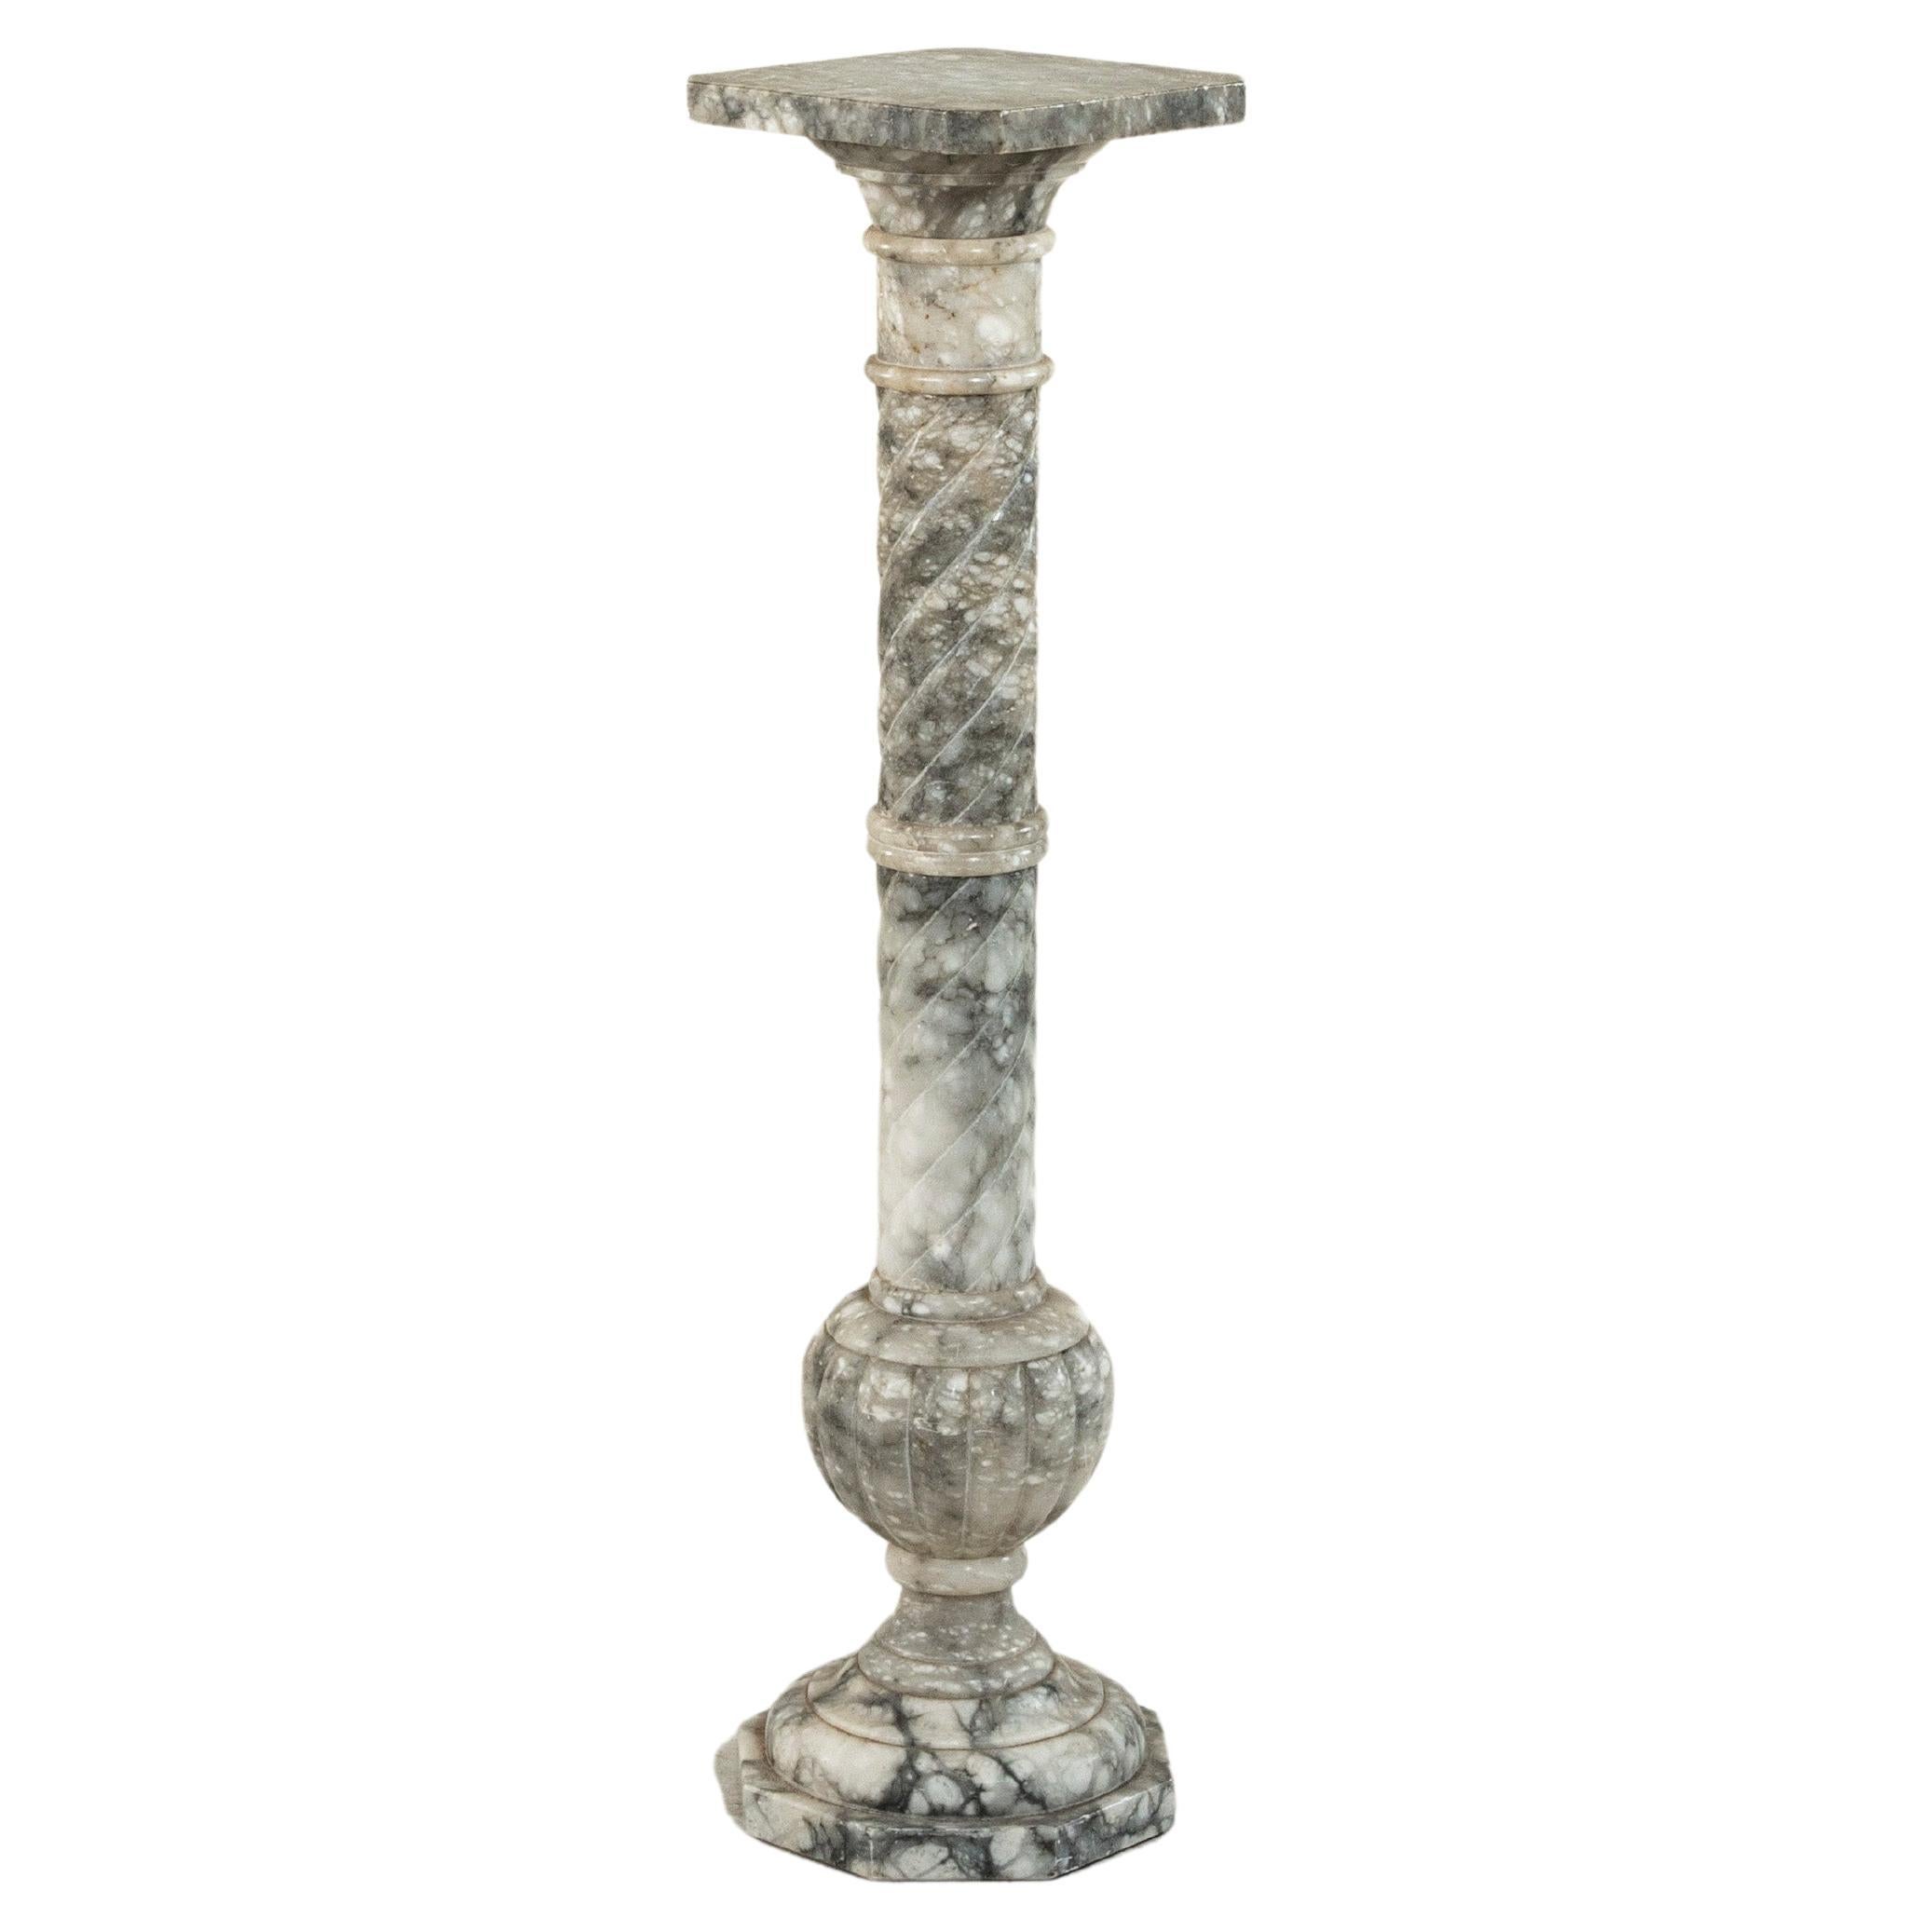 Late 19th century French Marble Column, Pedestal, or Sculpture Stand